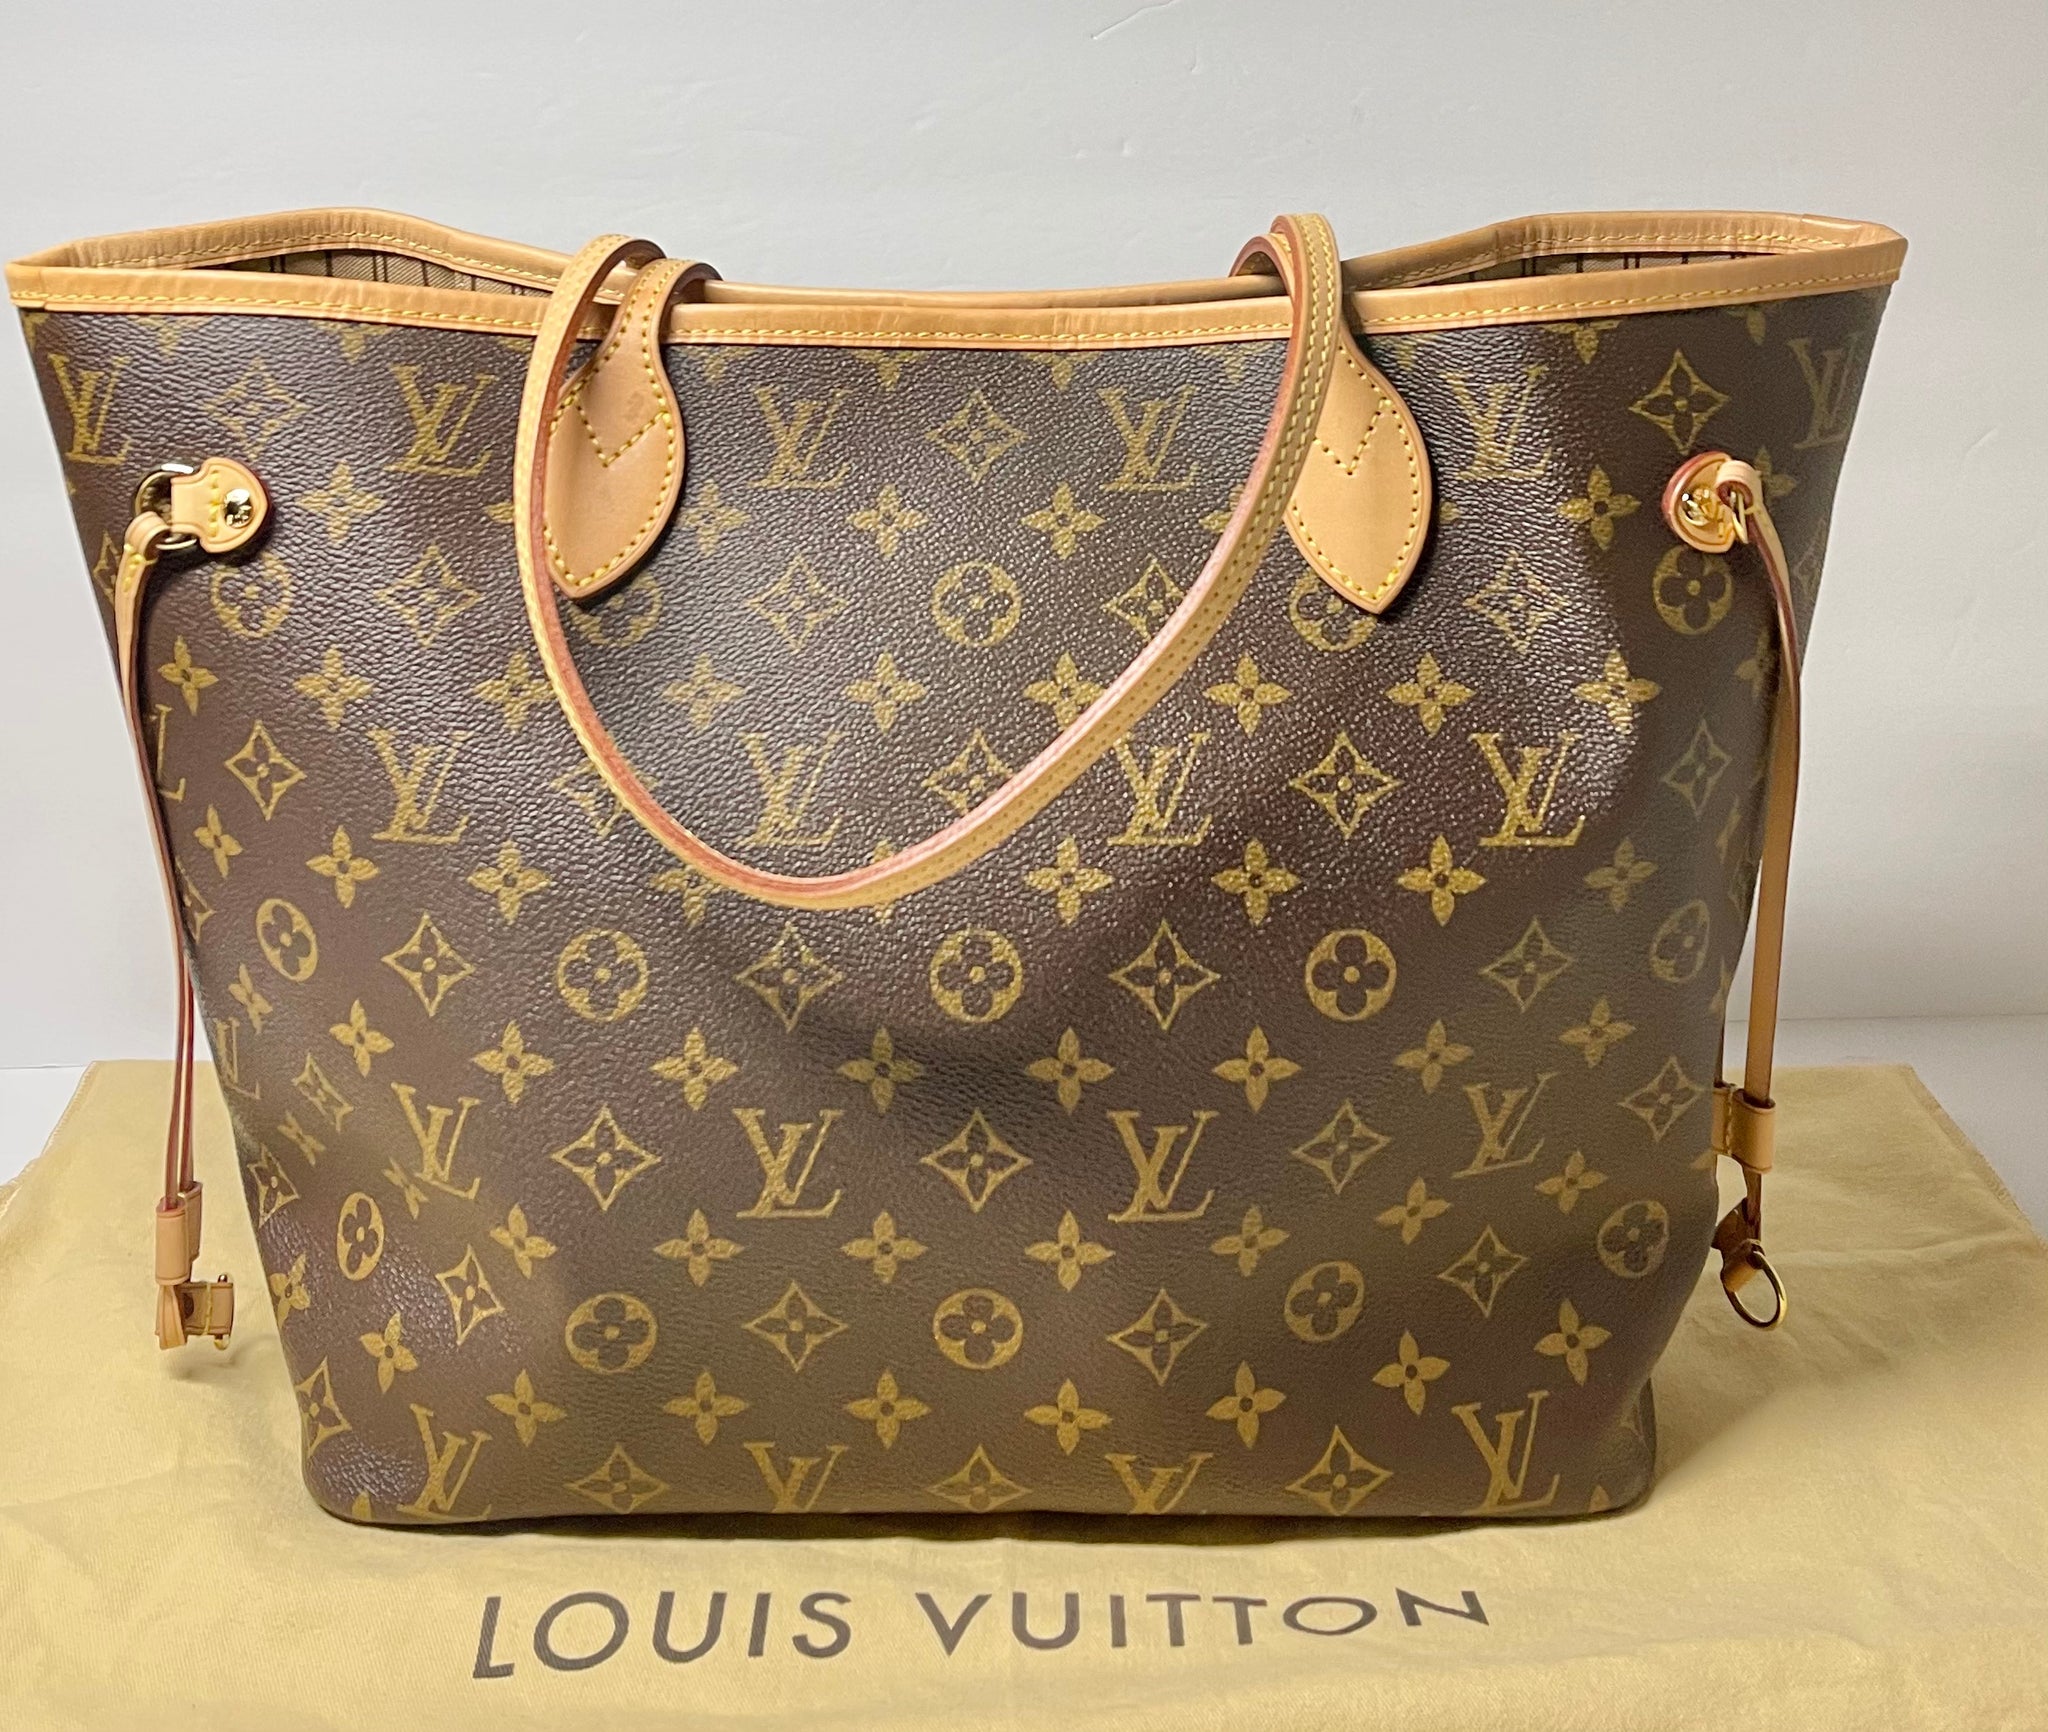 Authentic Louis Vuitton Neverfull MM (excellent condition) for